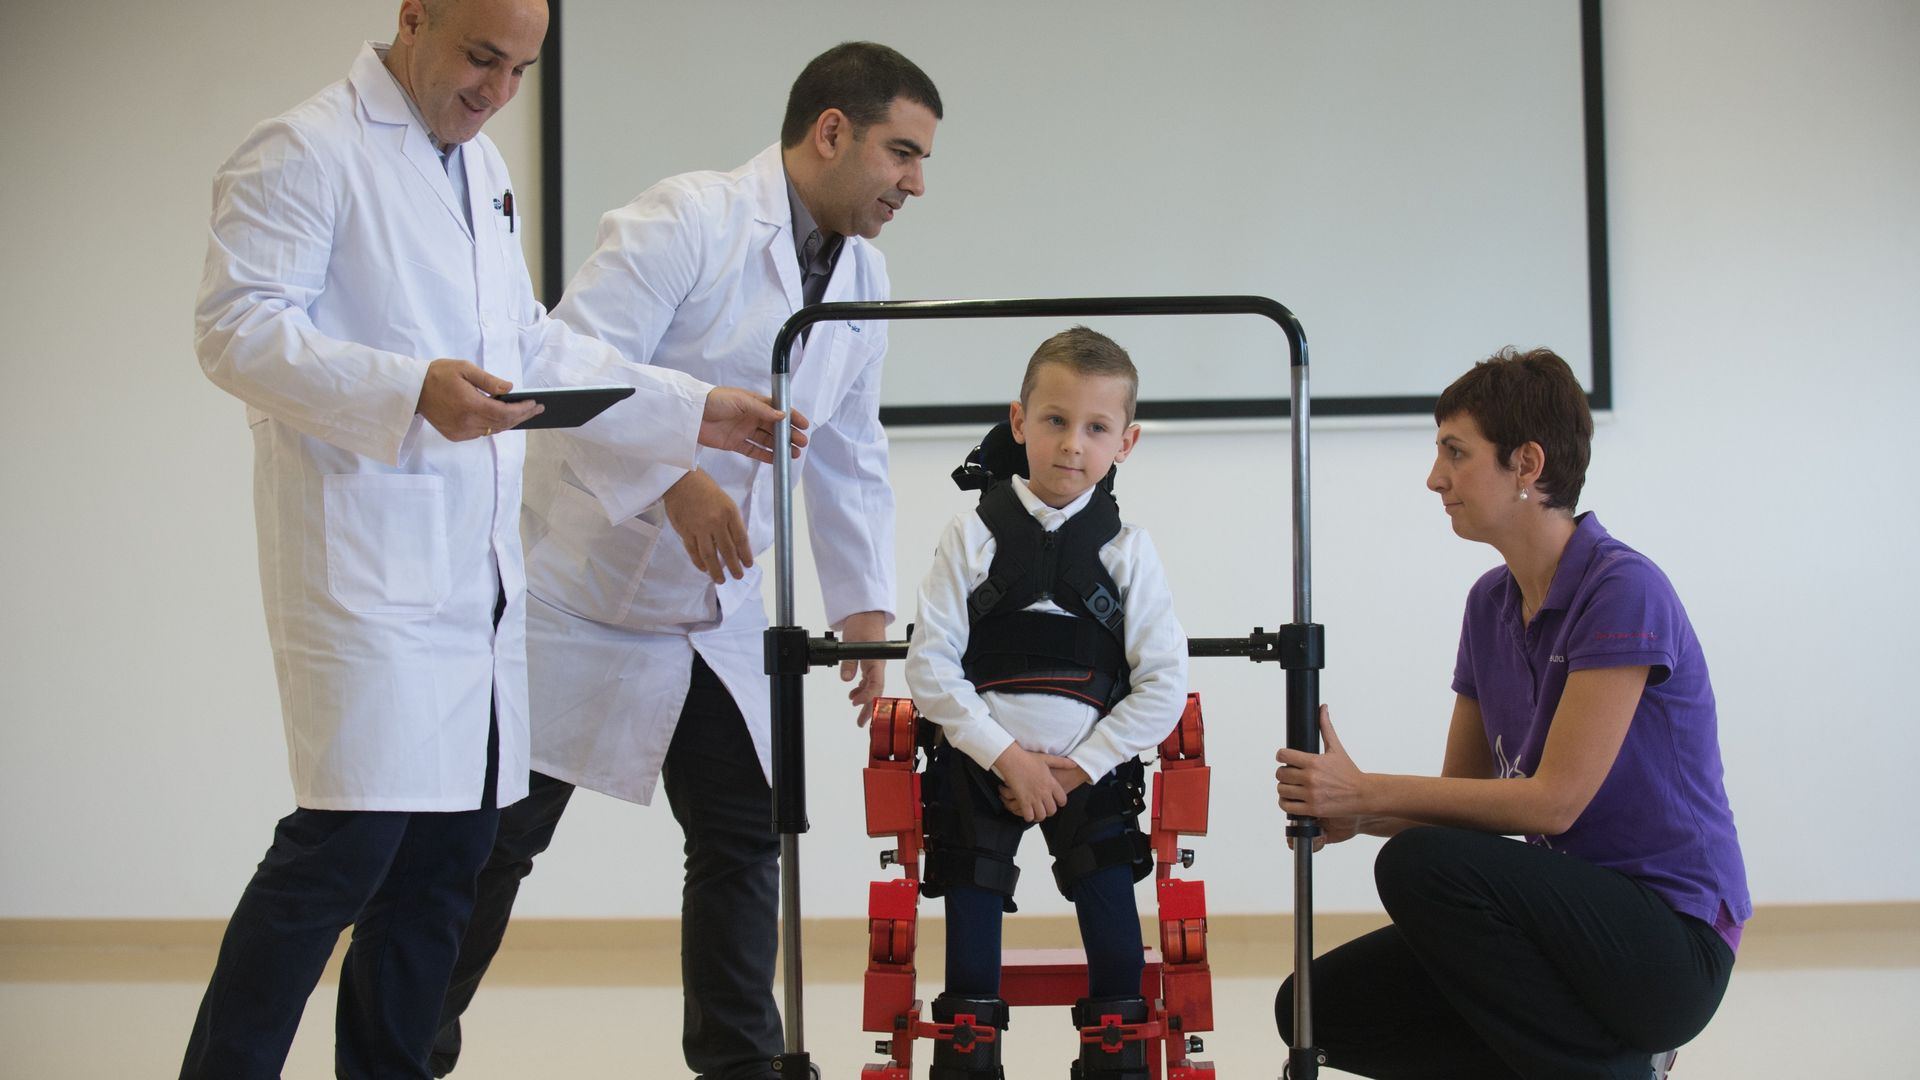 Doctors look at a child who has spinal muscular atrophy.